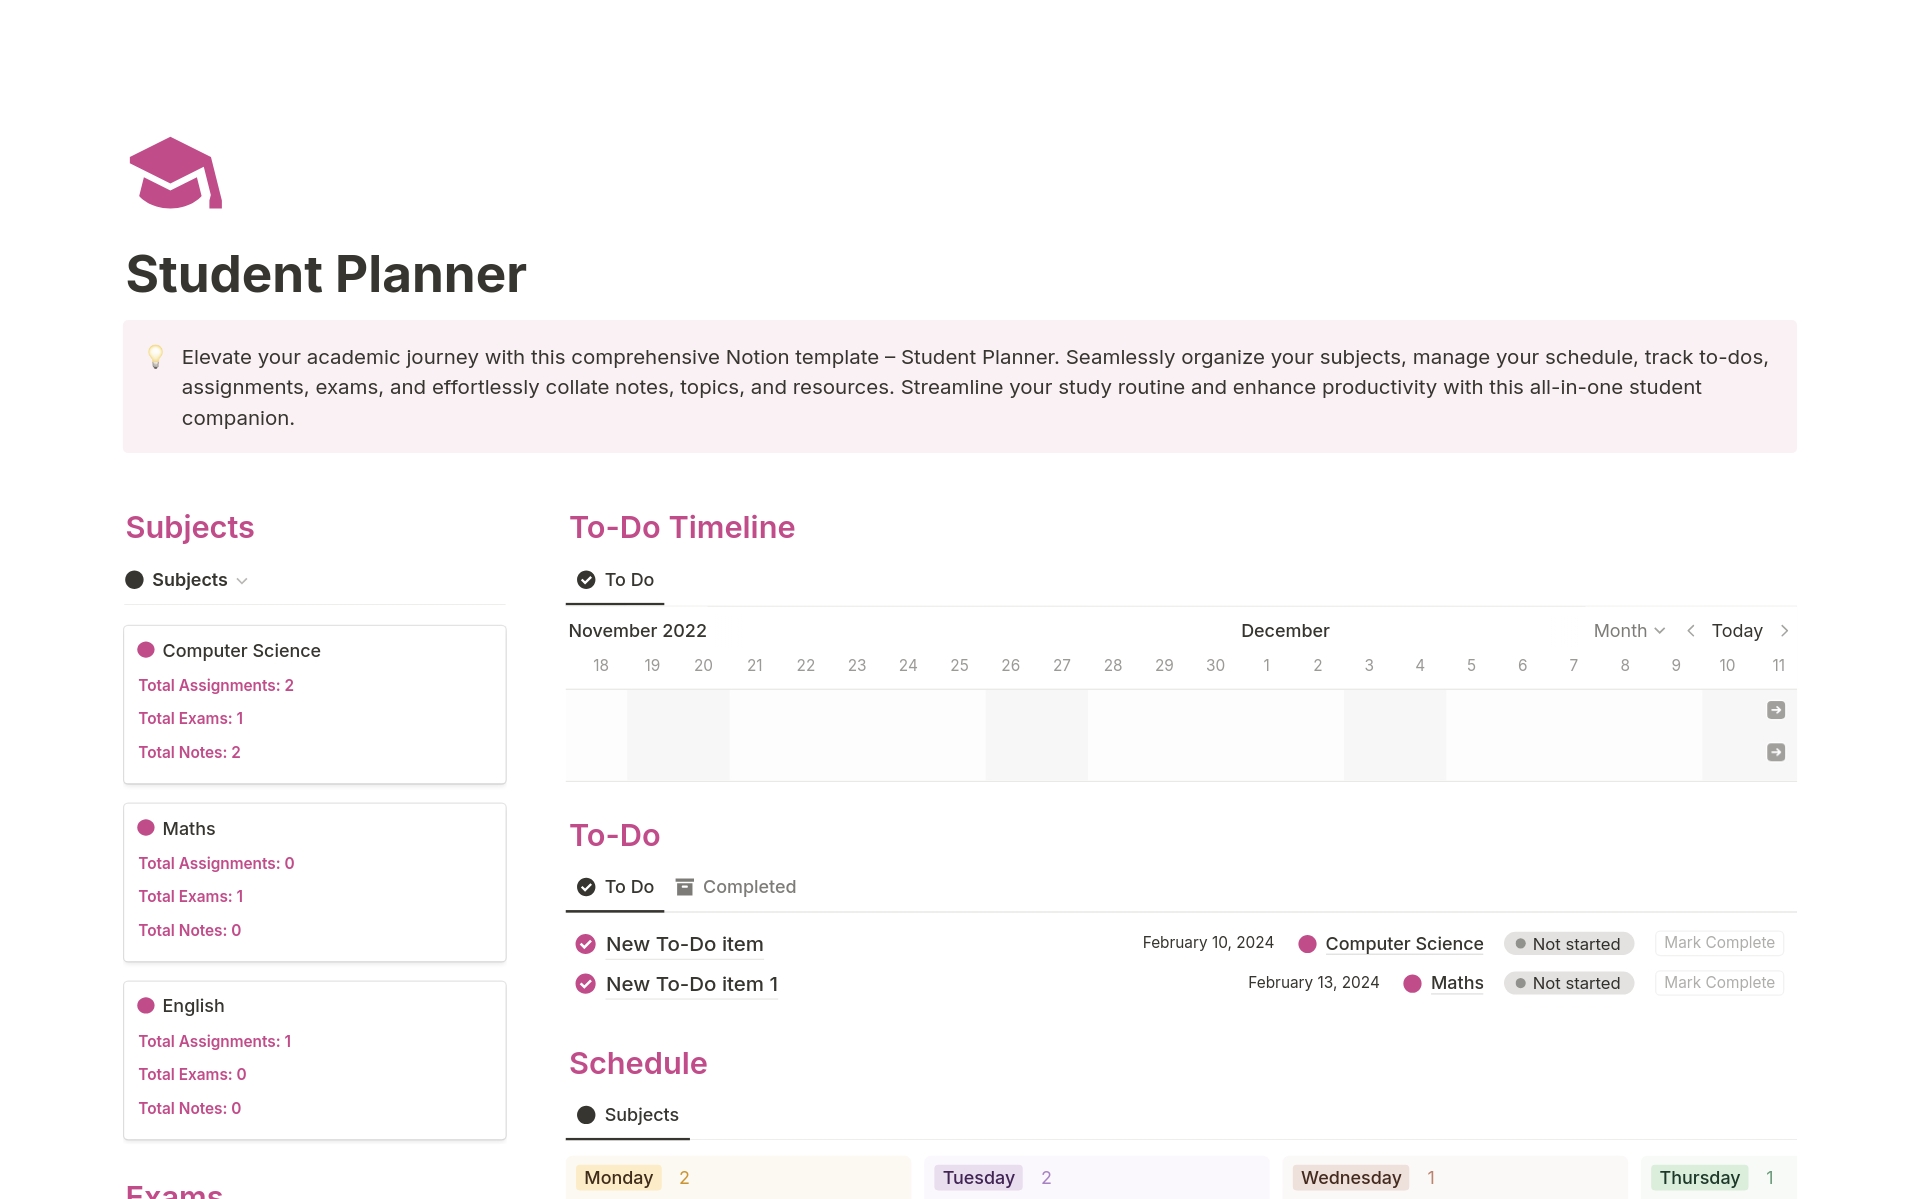 Introducing the Student Planner Notion template, a dynamic and simple tool designed to revolutionize your academic experience.